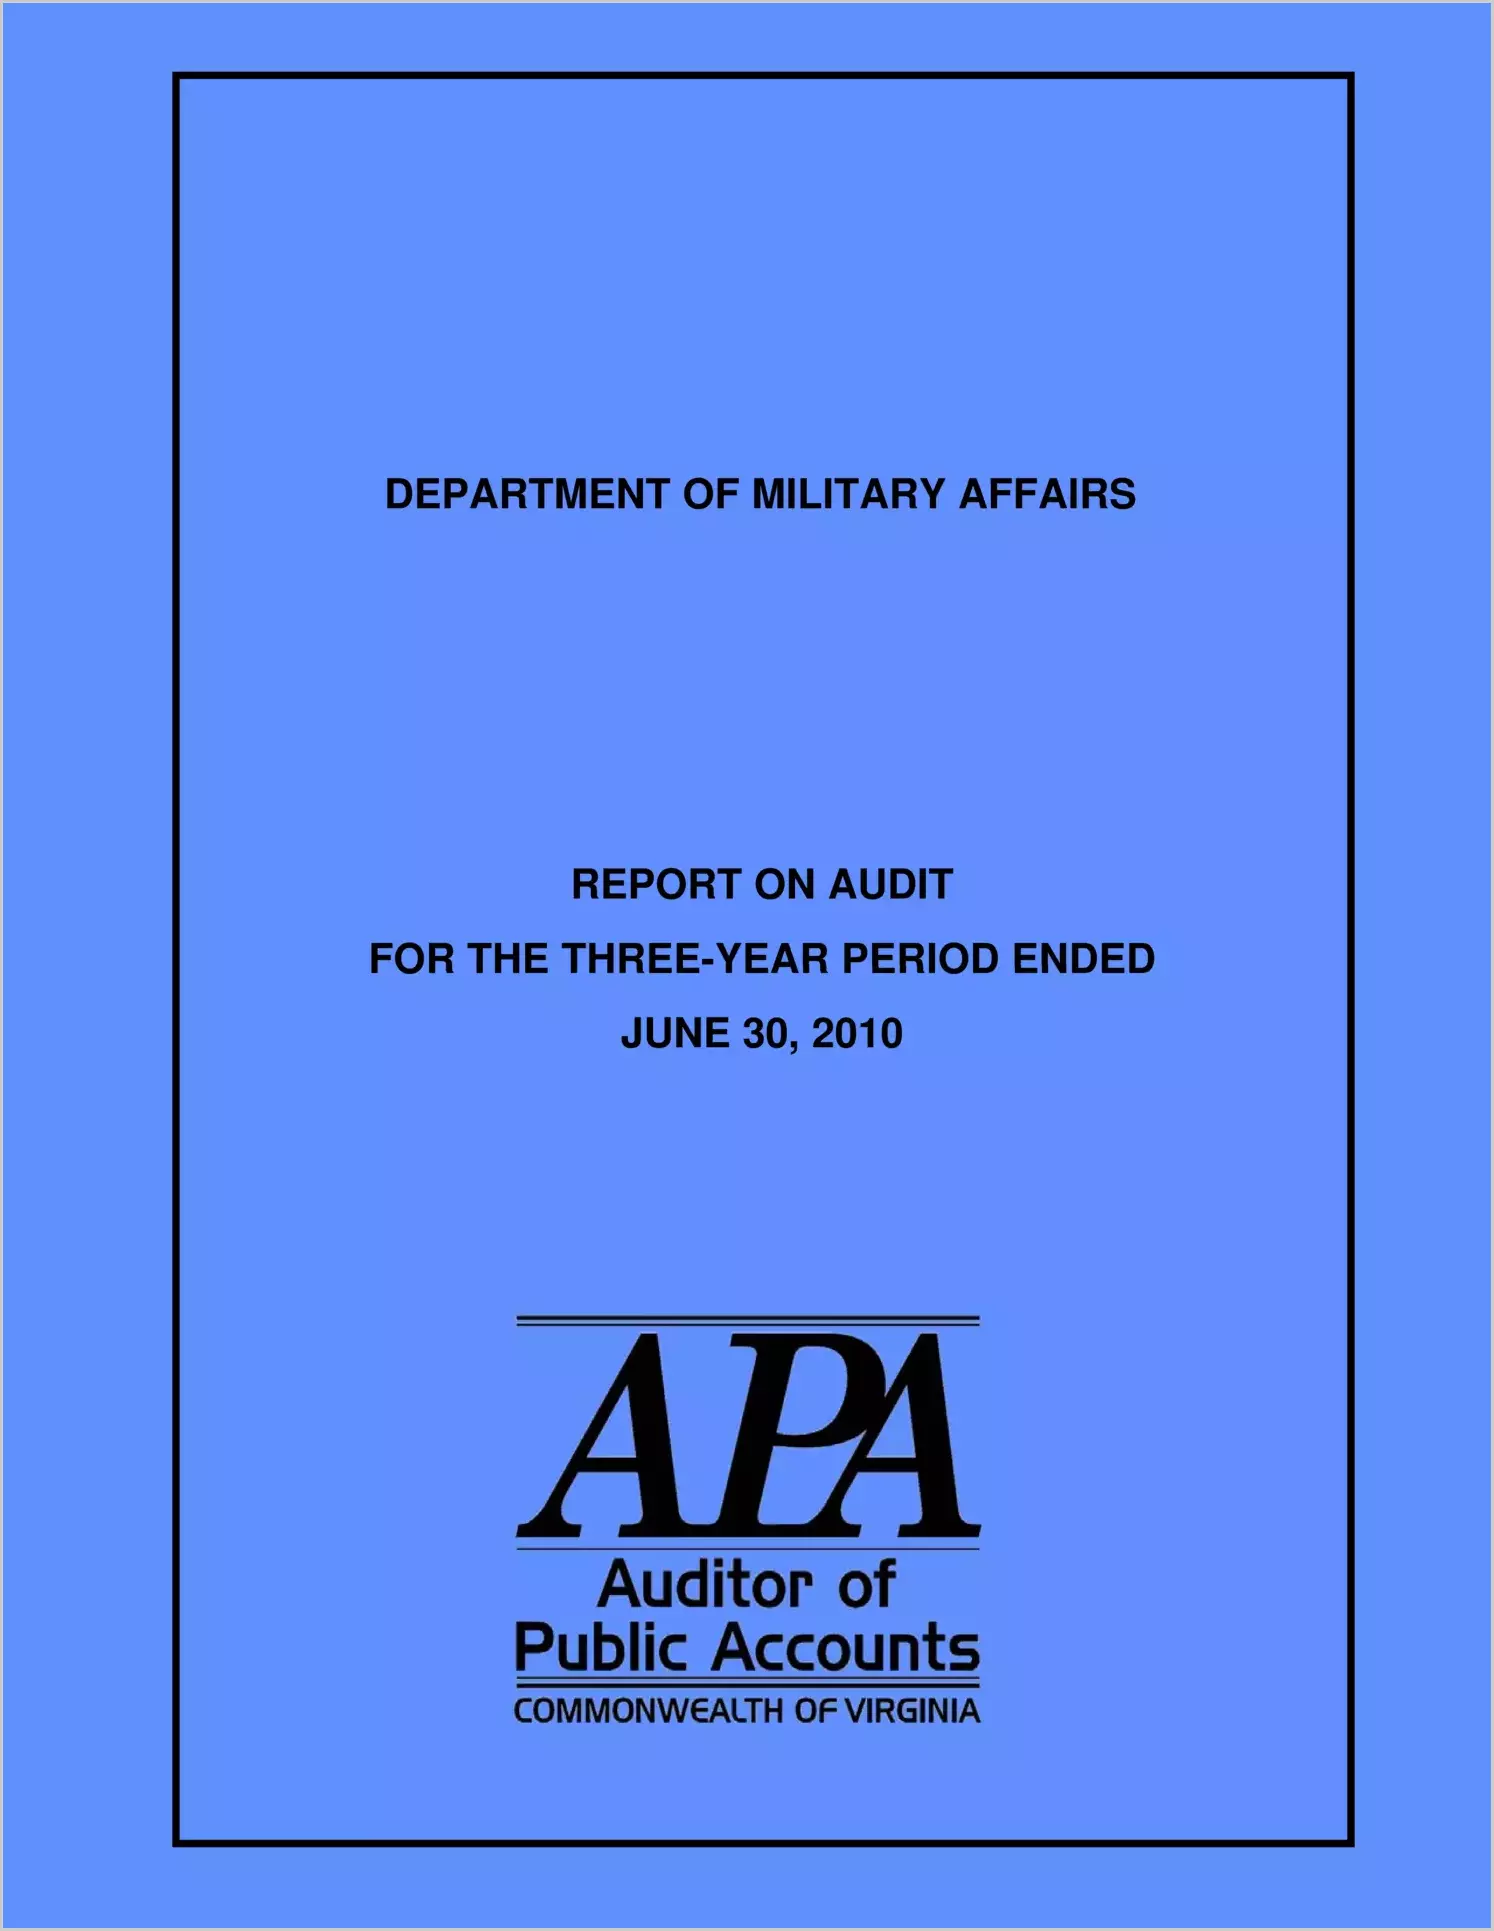 Department of Military Affairs for the three year period ended June 30, 2010